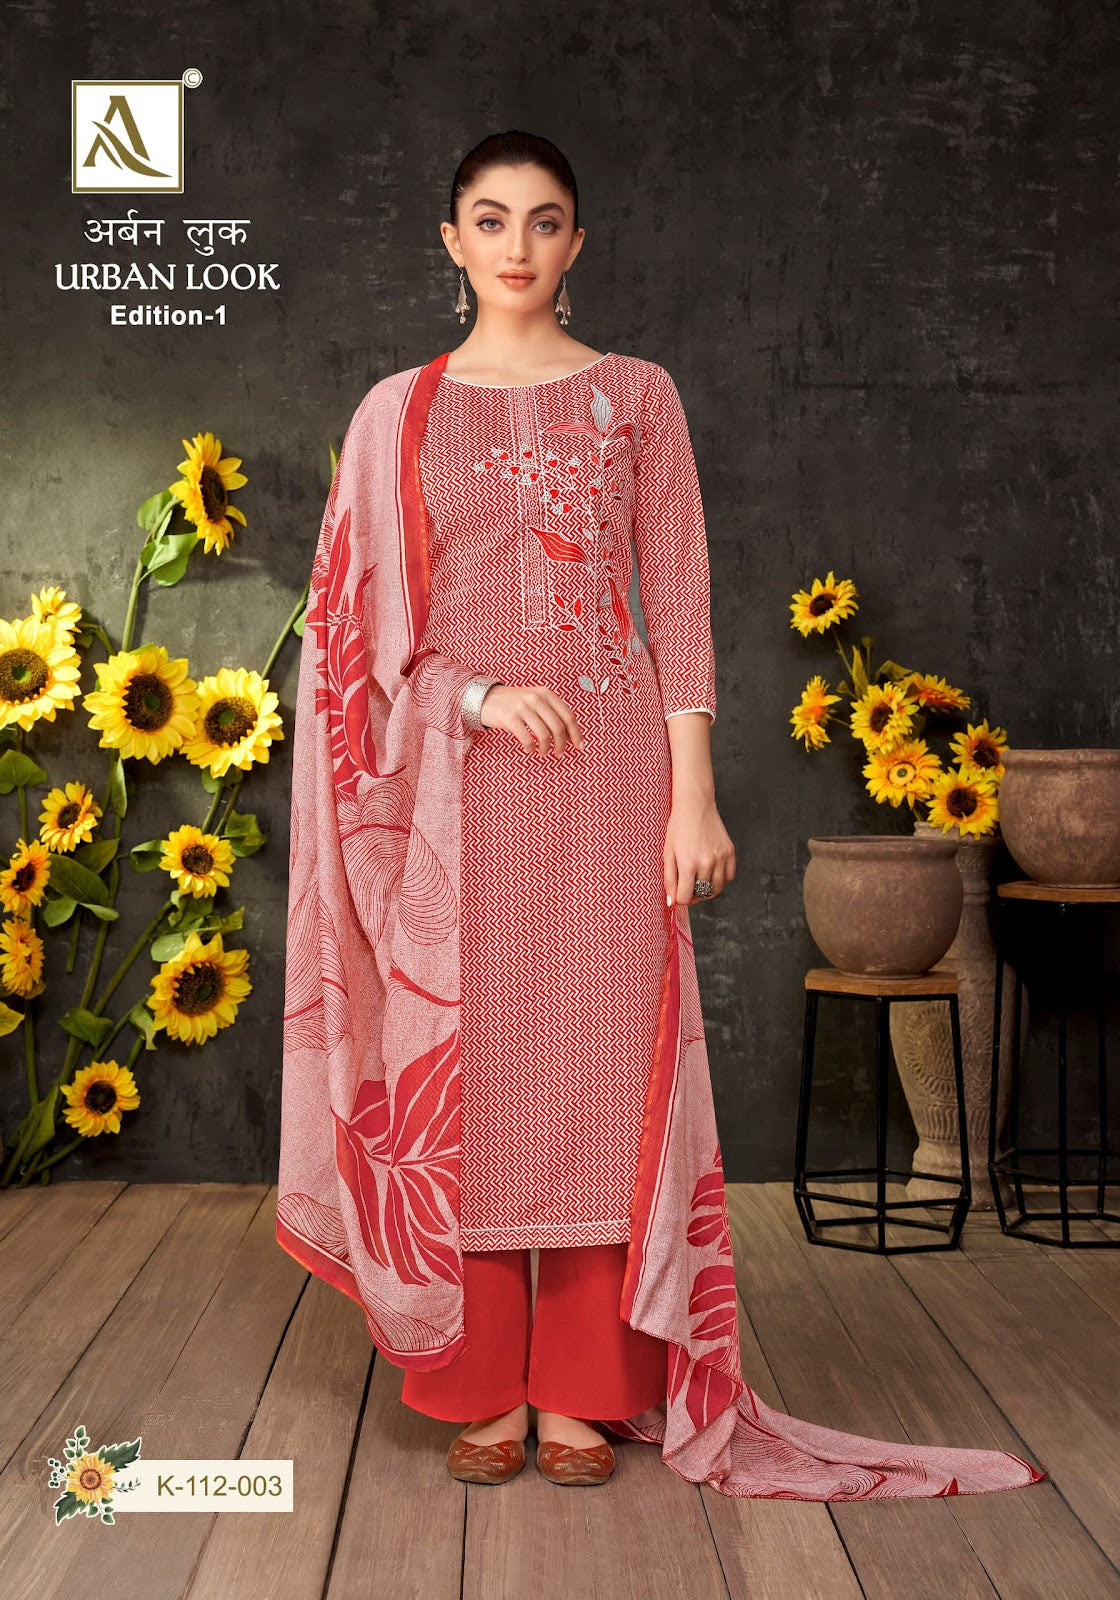 Urban Look Edition 1 Alok Pure Zam Pant Style Suits Manufacturer India